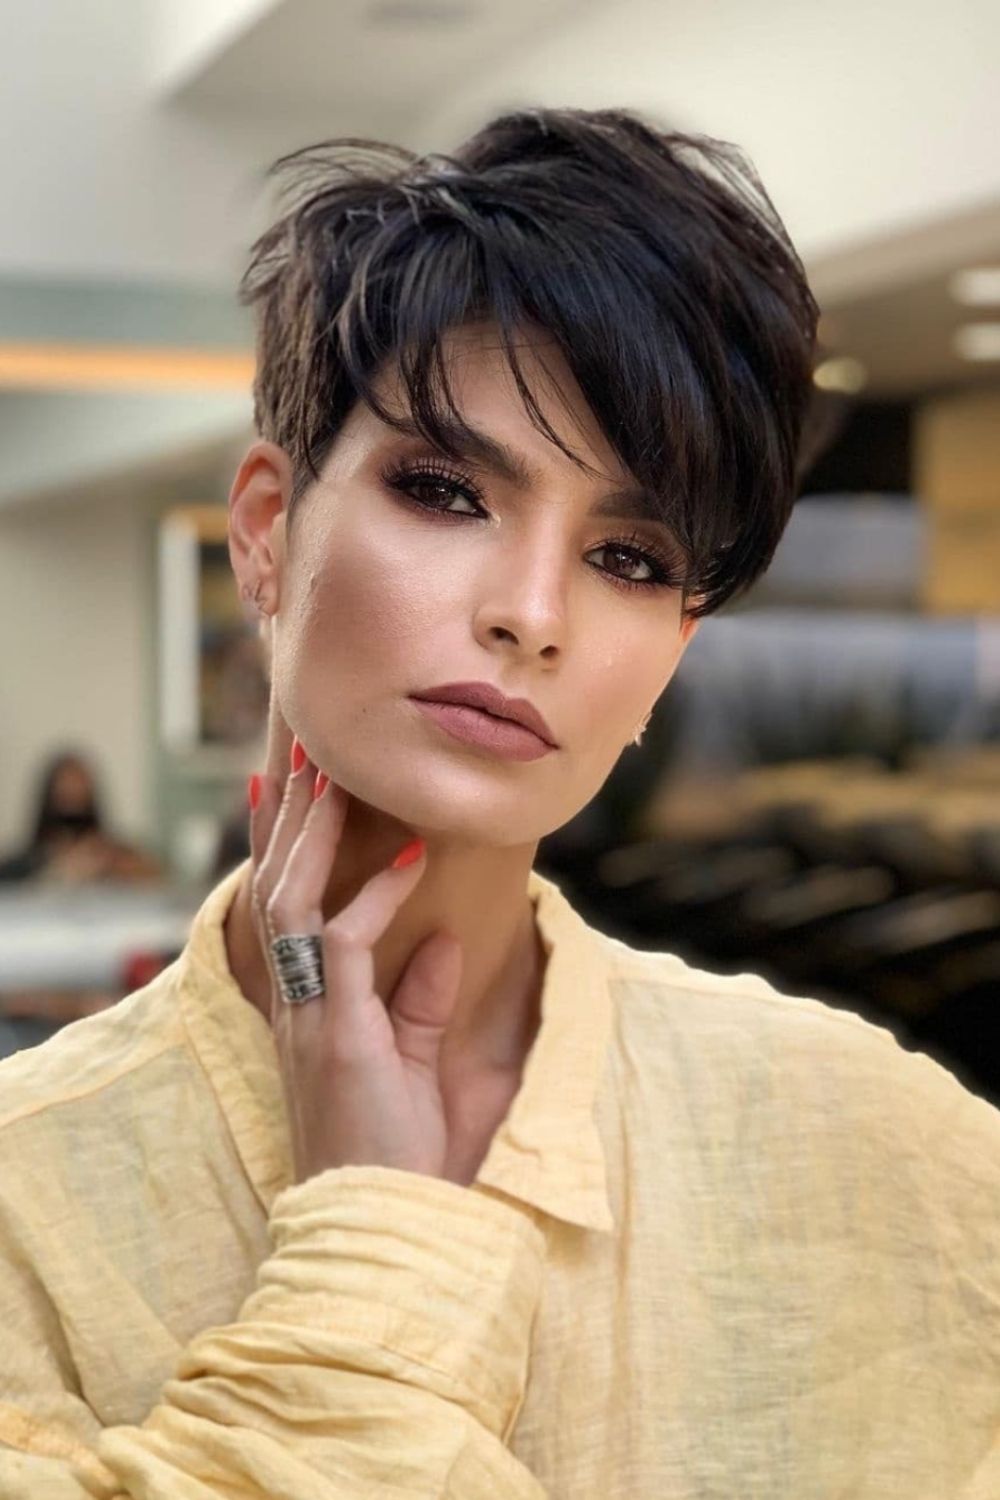 Best short pixie cut and short hairstyle for cool women